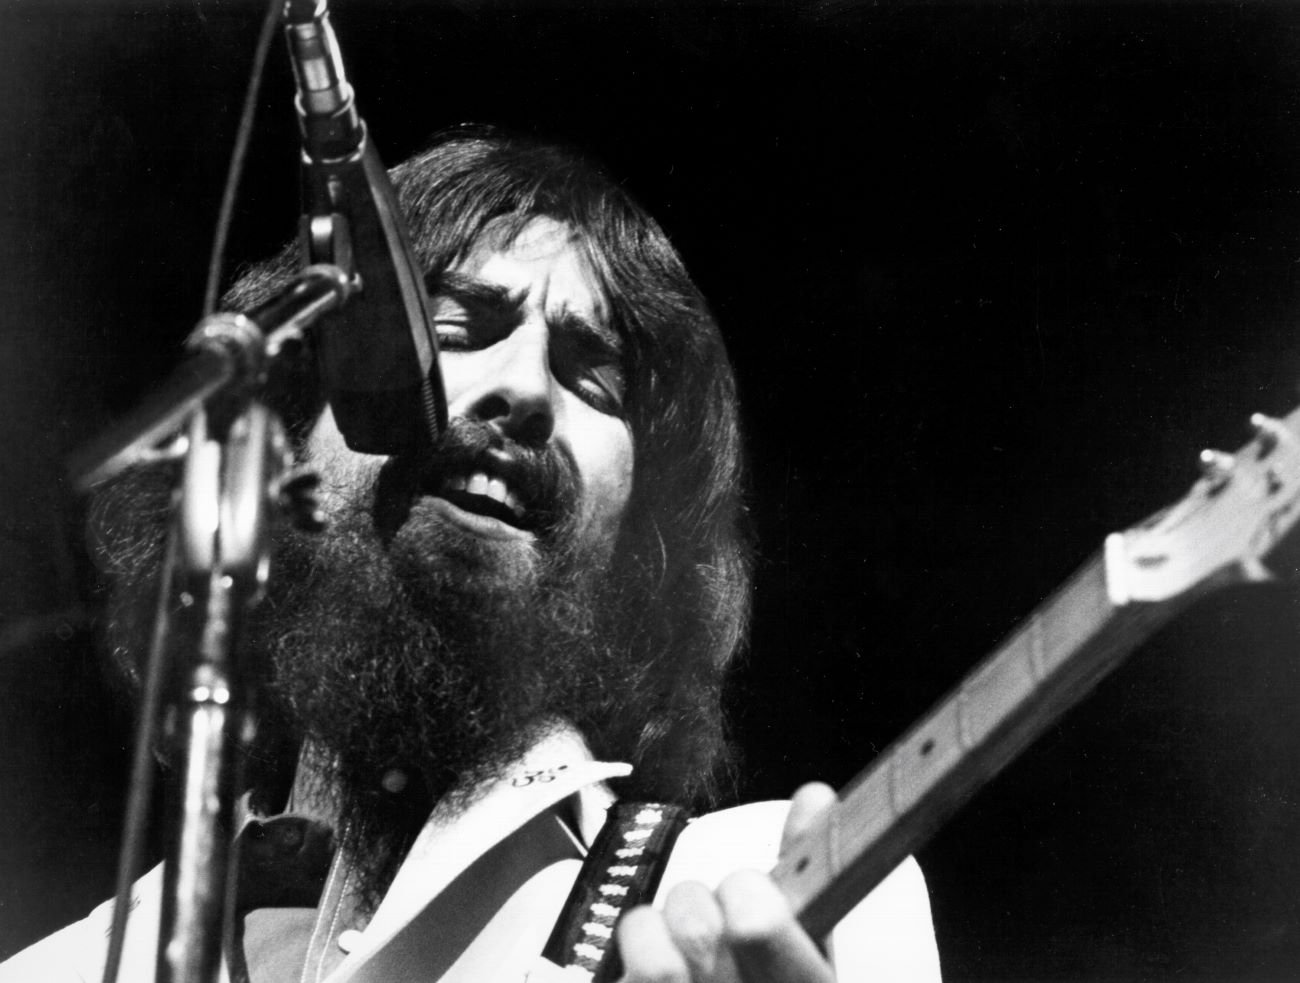 A black and white picture of George Harrison singing into a microphone and playing guitar.